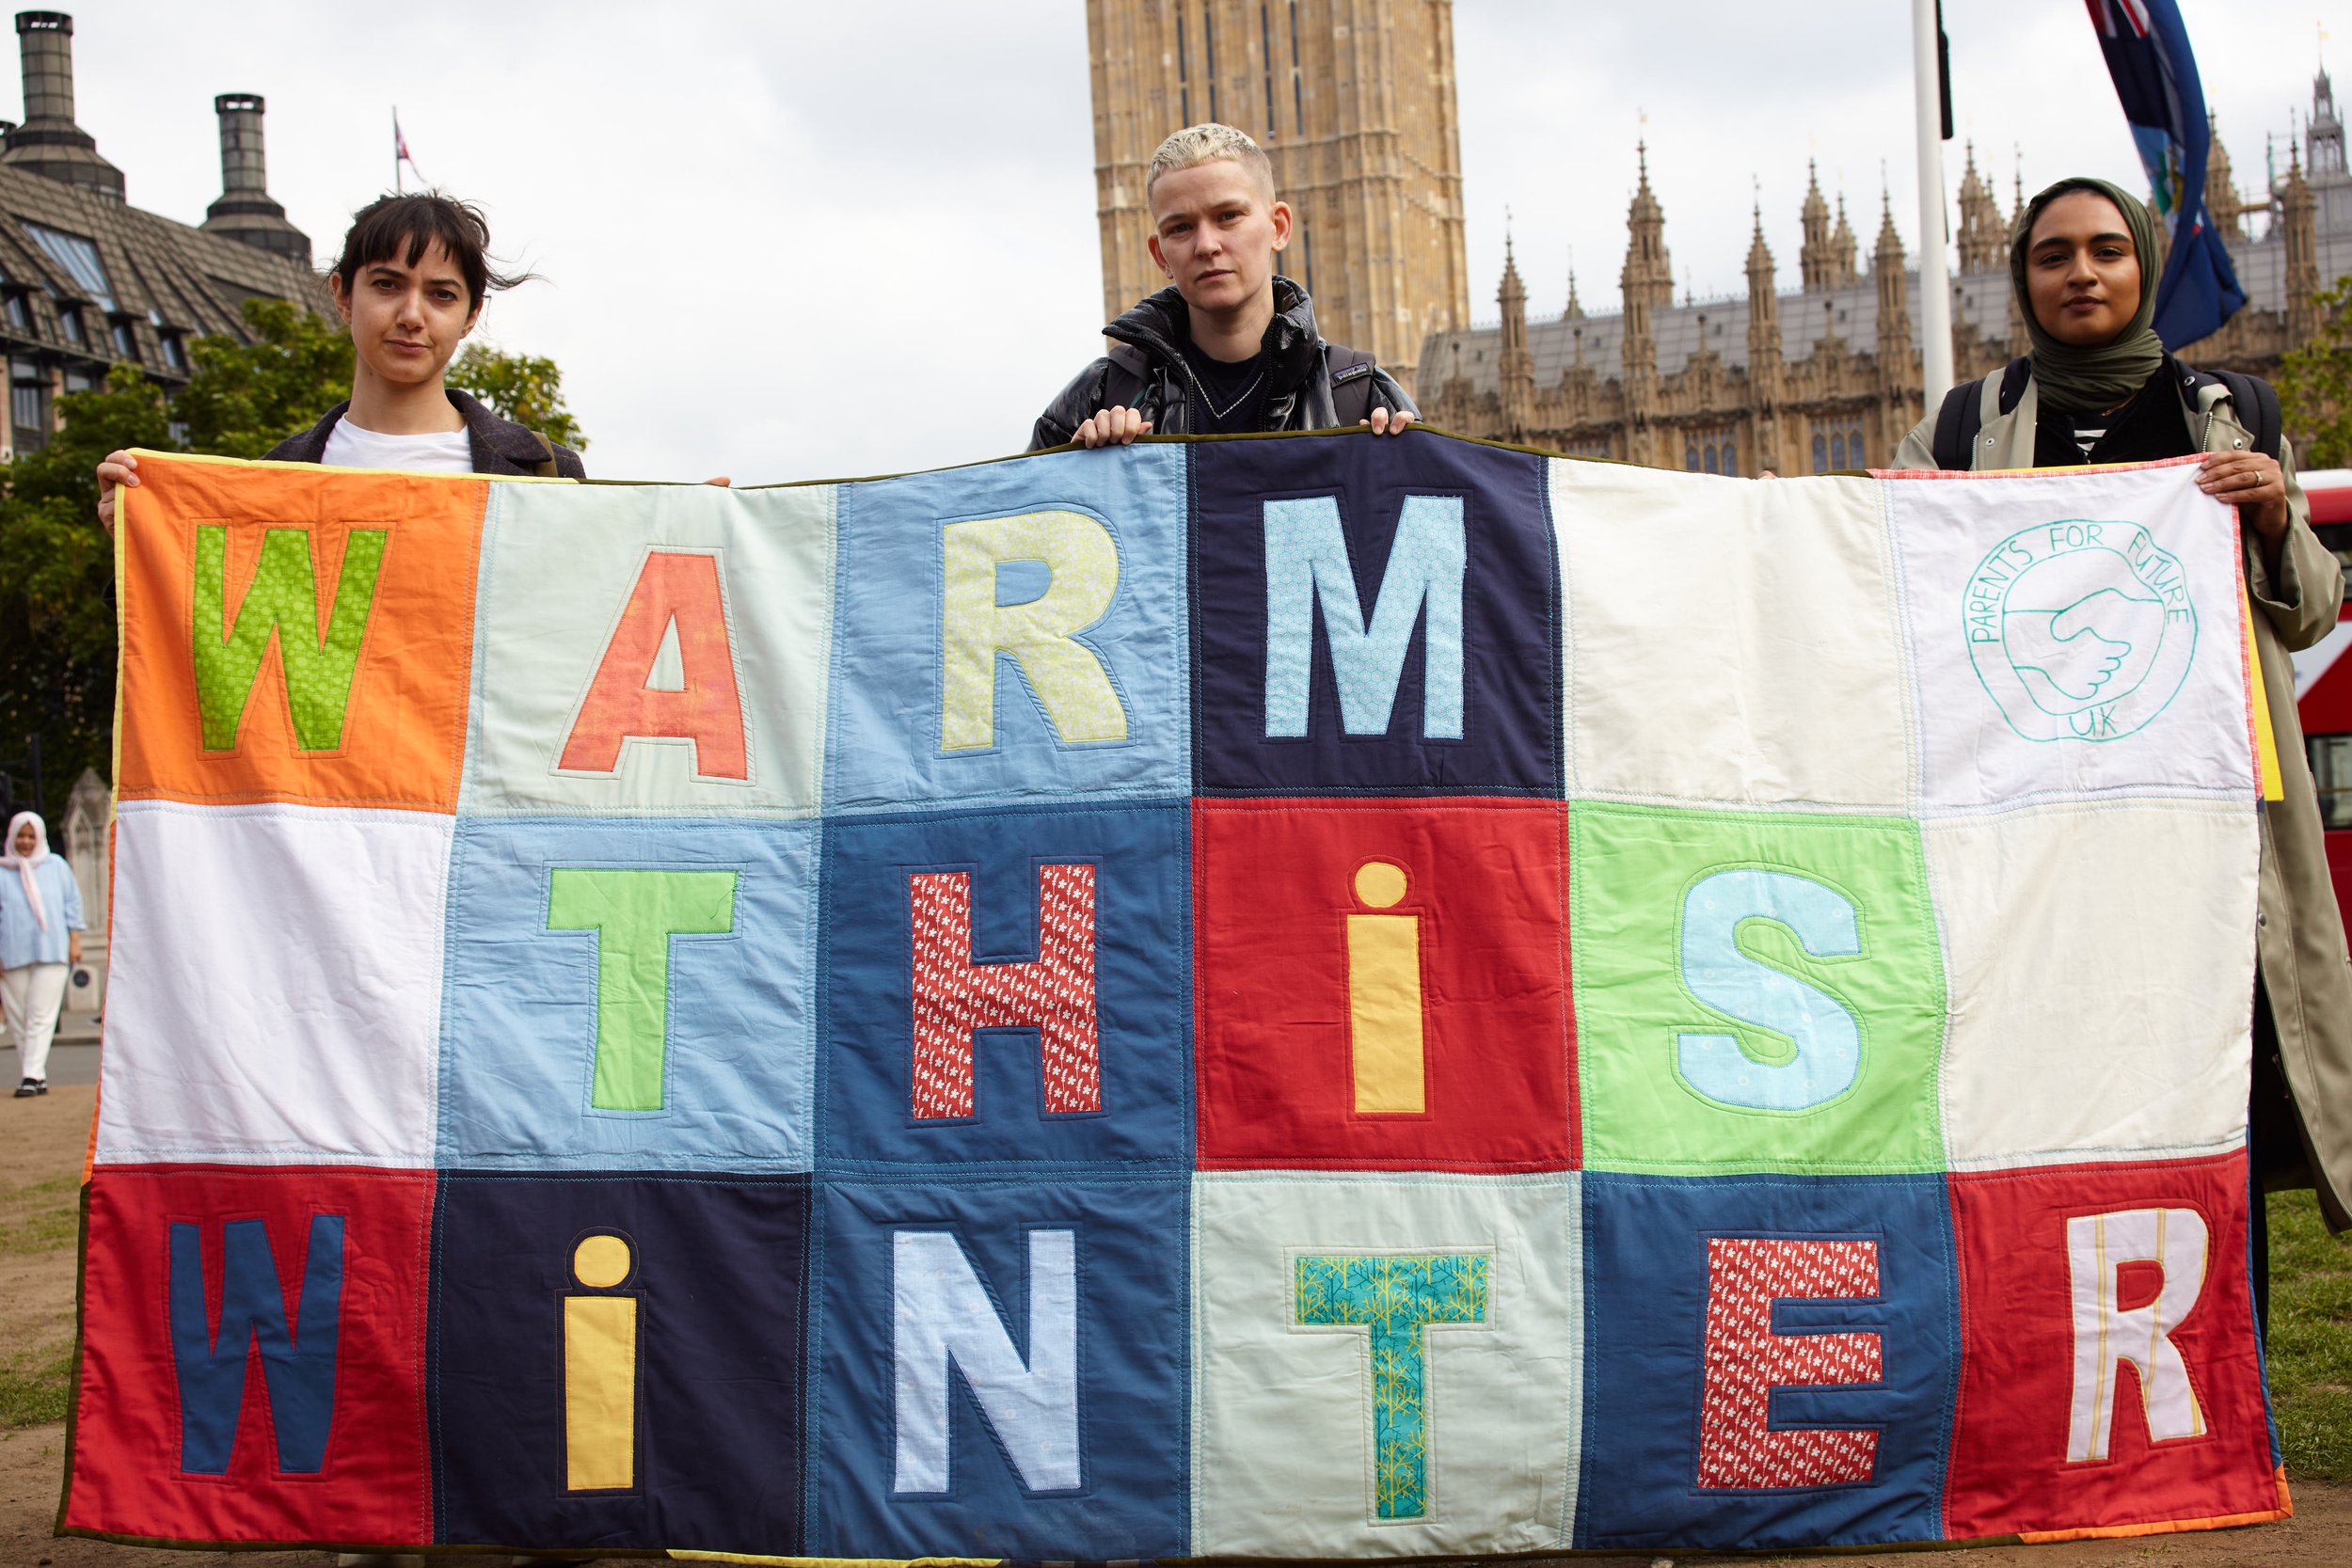 Photograph by Hatty Frances Bell of three women holding Warm This Winter placard at political demonstration in London 